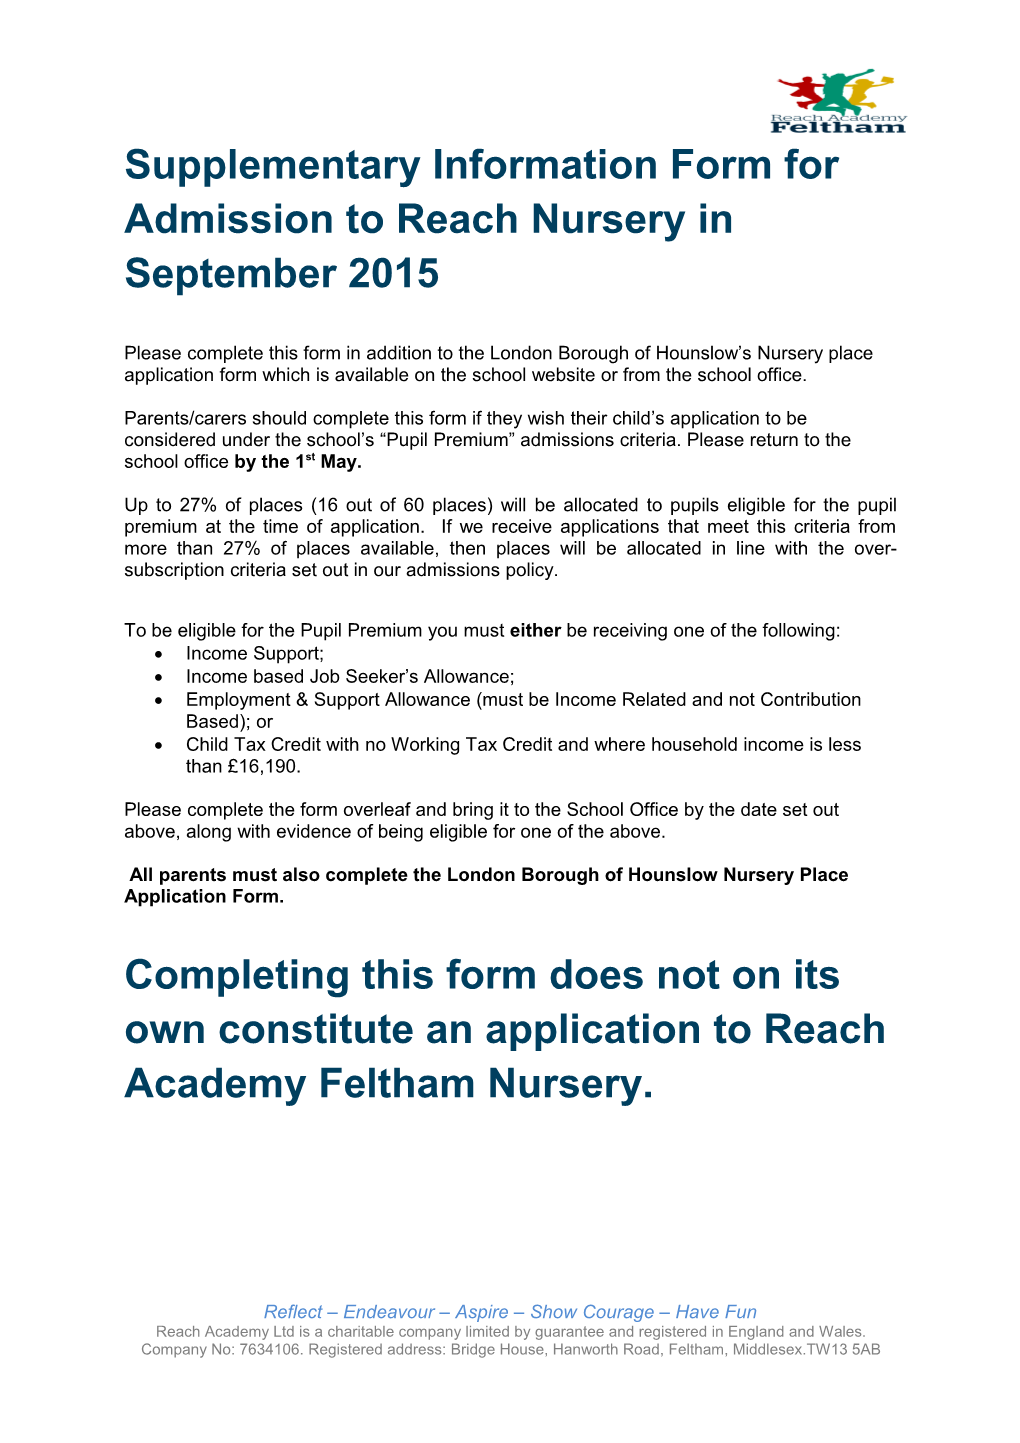 Supplementary Information Form for Admission to Reach Nursery in September 2015